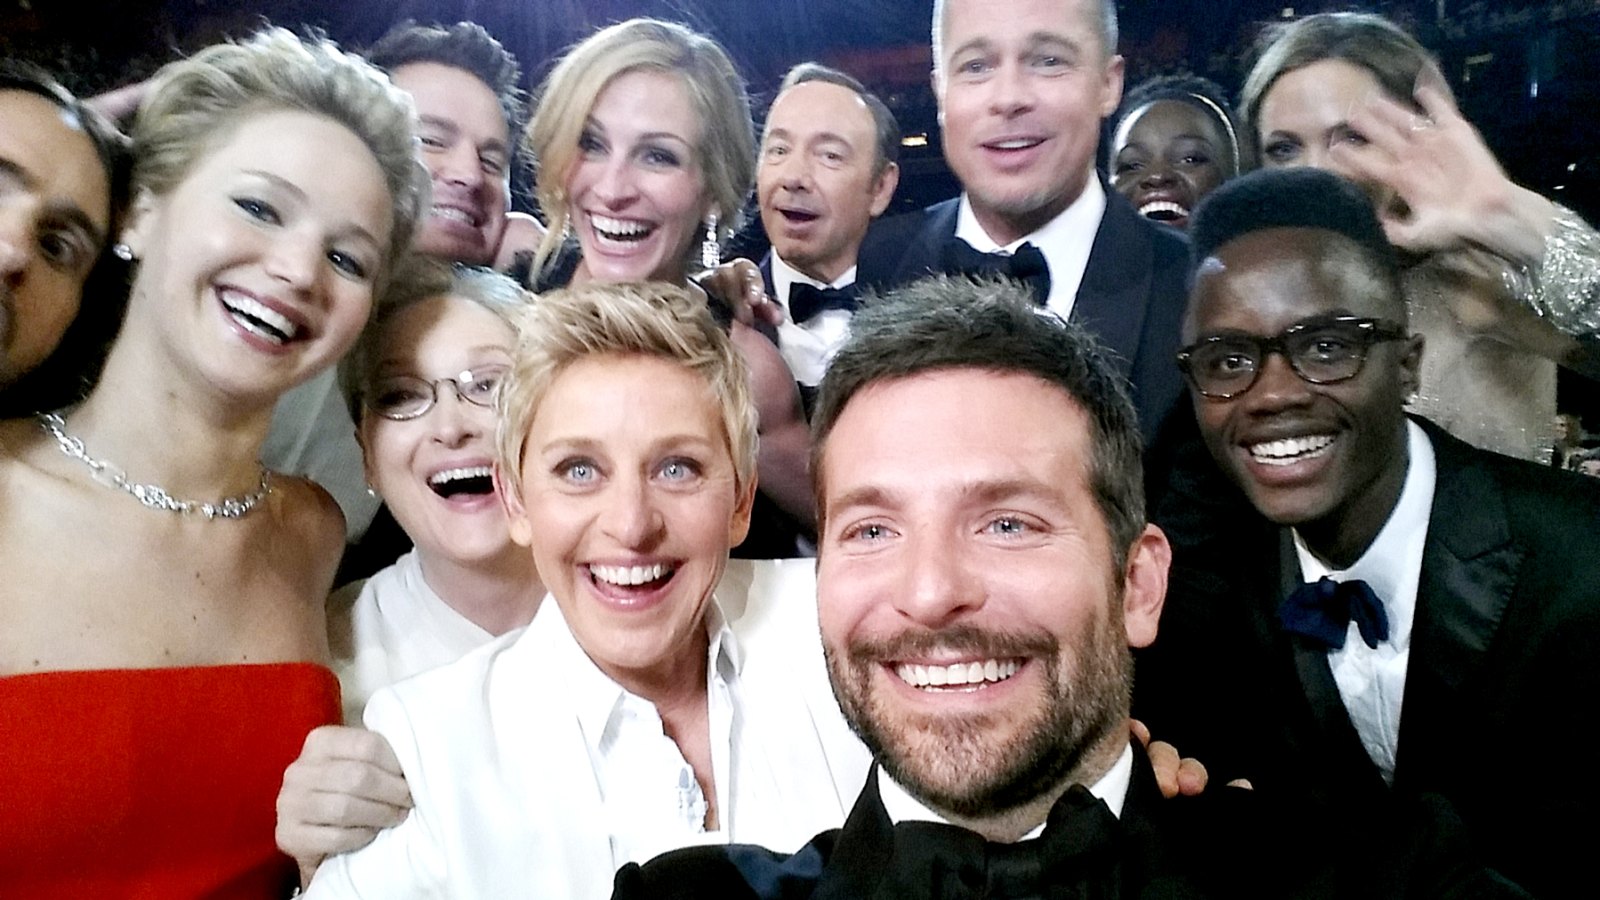 Ellen DeGeneres poses for a selfie taken by Bradley Cooper with (clockwise from L-R) Jared Leto, Jennifer Lawrence, Channing Tatum, Meryl Streep, Julia Roberts, Kevin Spacey, Brad Pitt, Lupita Nyong'o, Angelina Jolie, Peter Nyong'o Jr. and Bradley Cooper during the 86th Annual Academy Awards at the Dolby Theatre on March 2, 2014 in Hollywood, California.